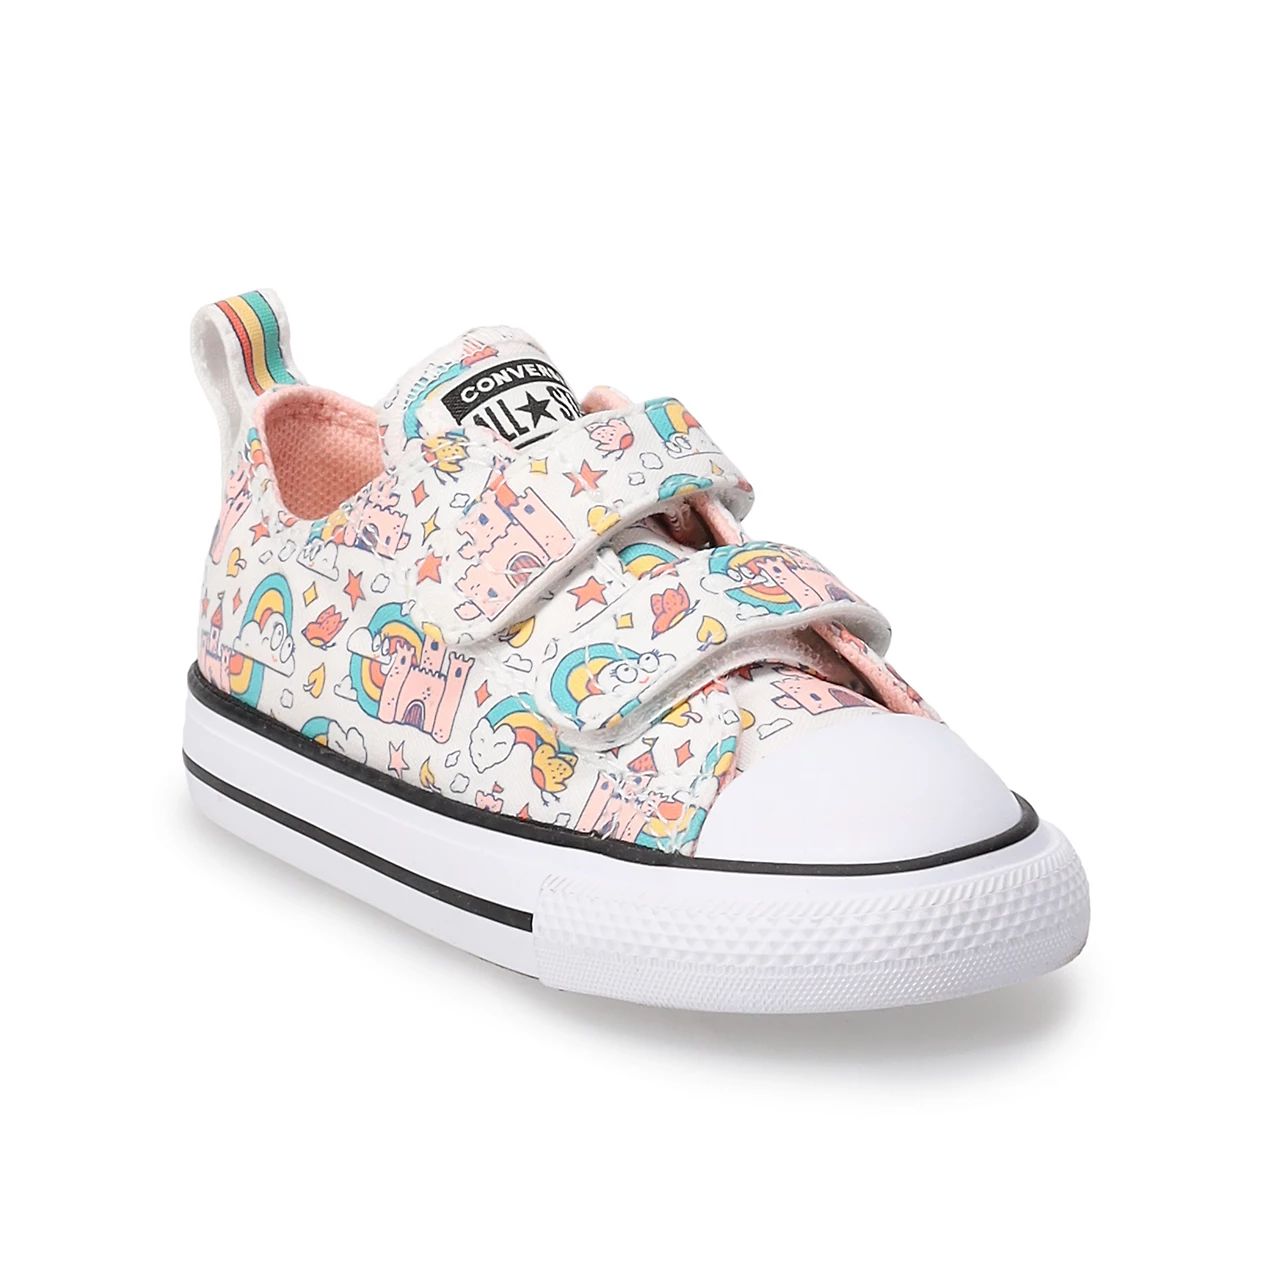 Converse Chuck Taylor All Star Rainbow Castles 2V Baby / Toddler Sneakers | Kohls | Kohl's